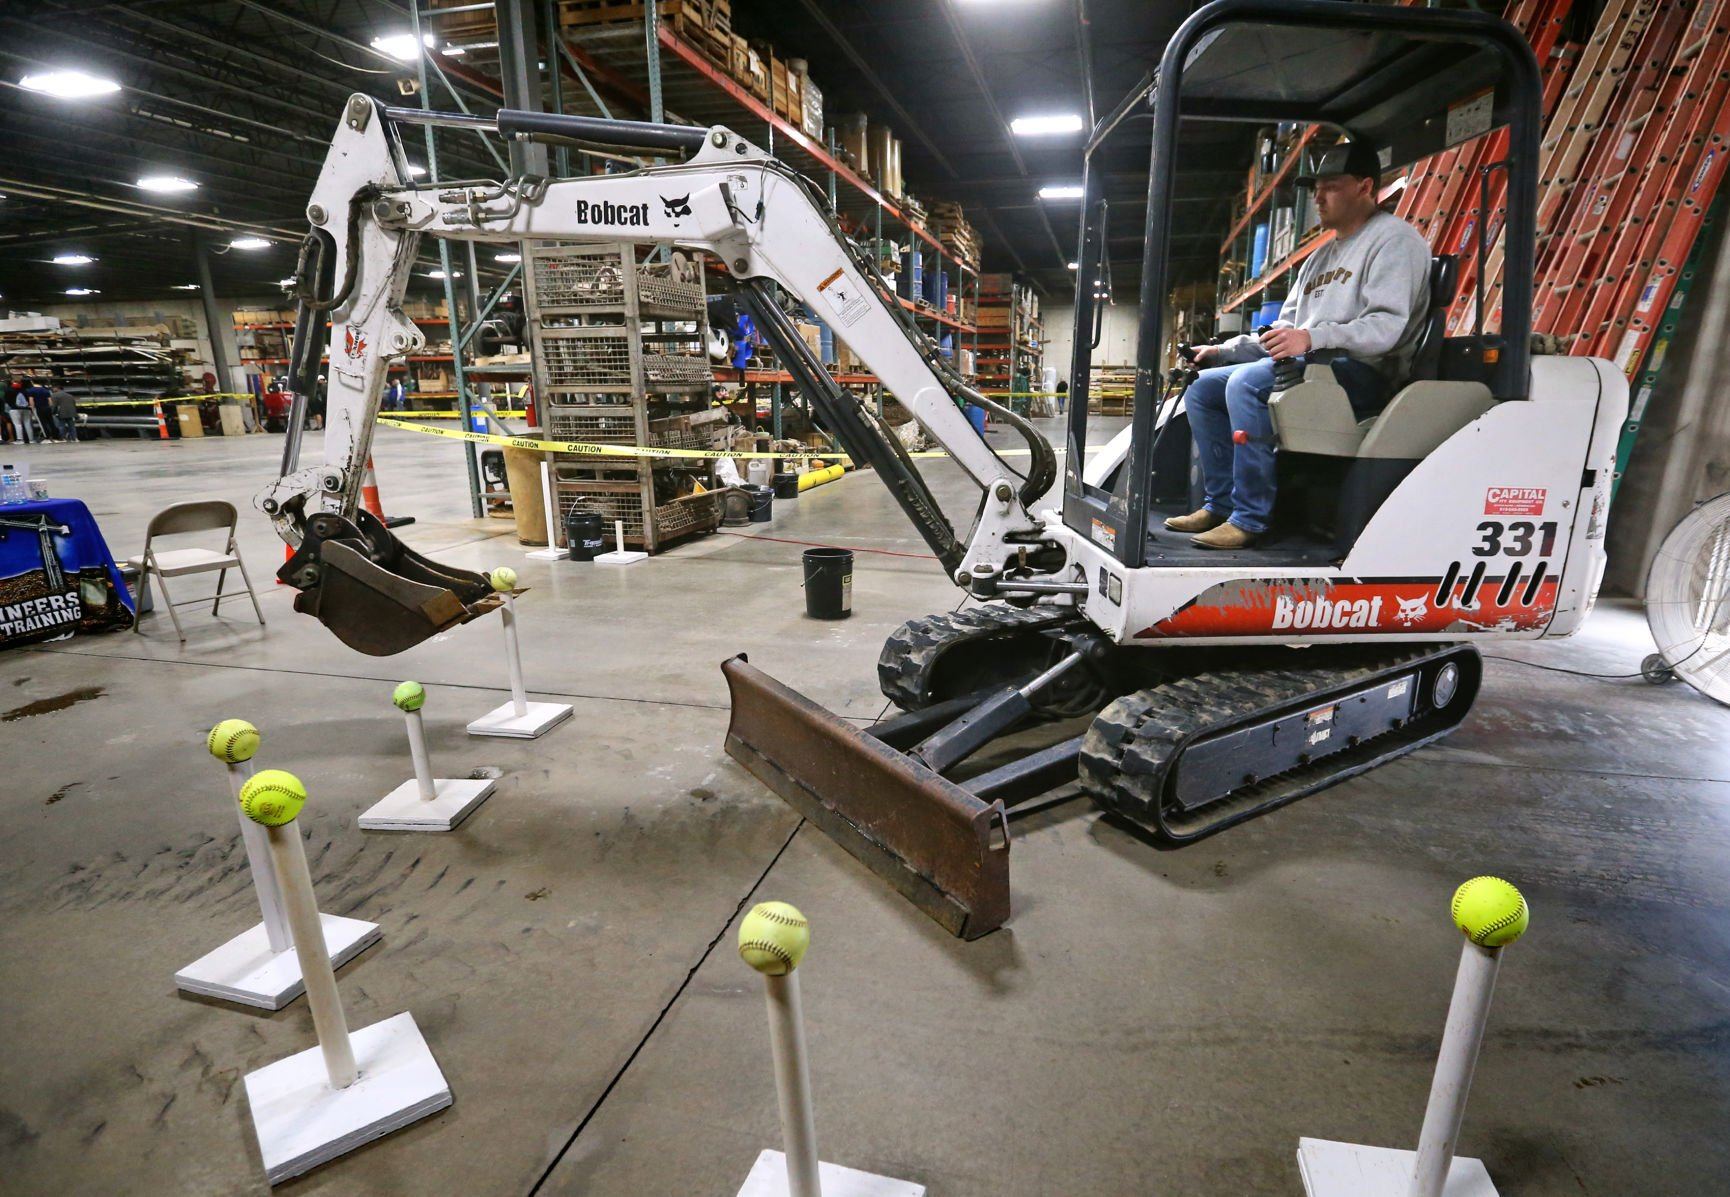 Dylan Dean, a senior at Dubuque Senior High School, uses a mini excavator during the Construction Industry Career Expo at Portzen Construction in Dubuque on Thursday, April 28, 2022.    PHOTO CREDIT: JESSICA REILLY